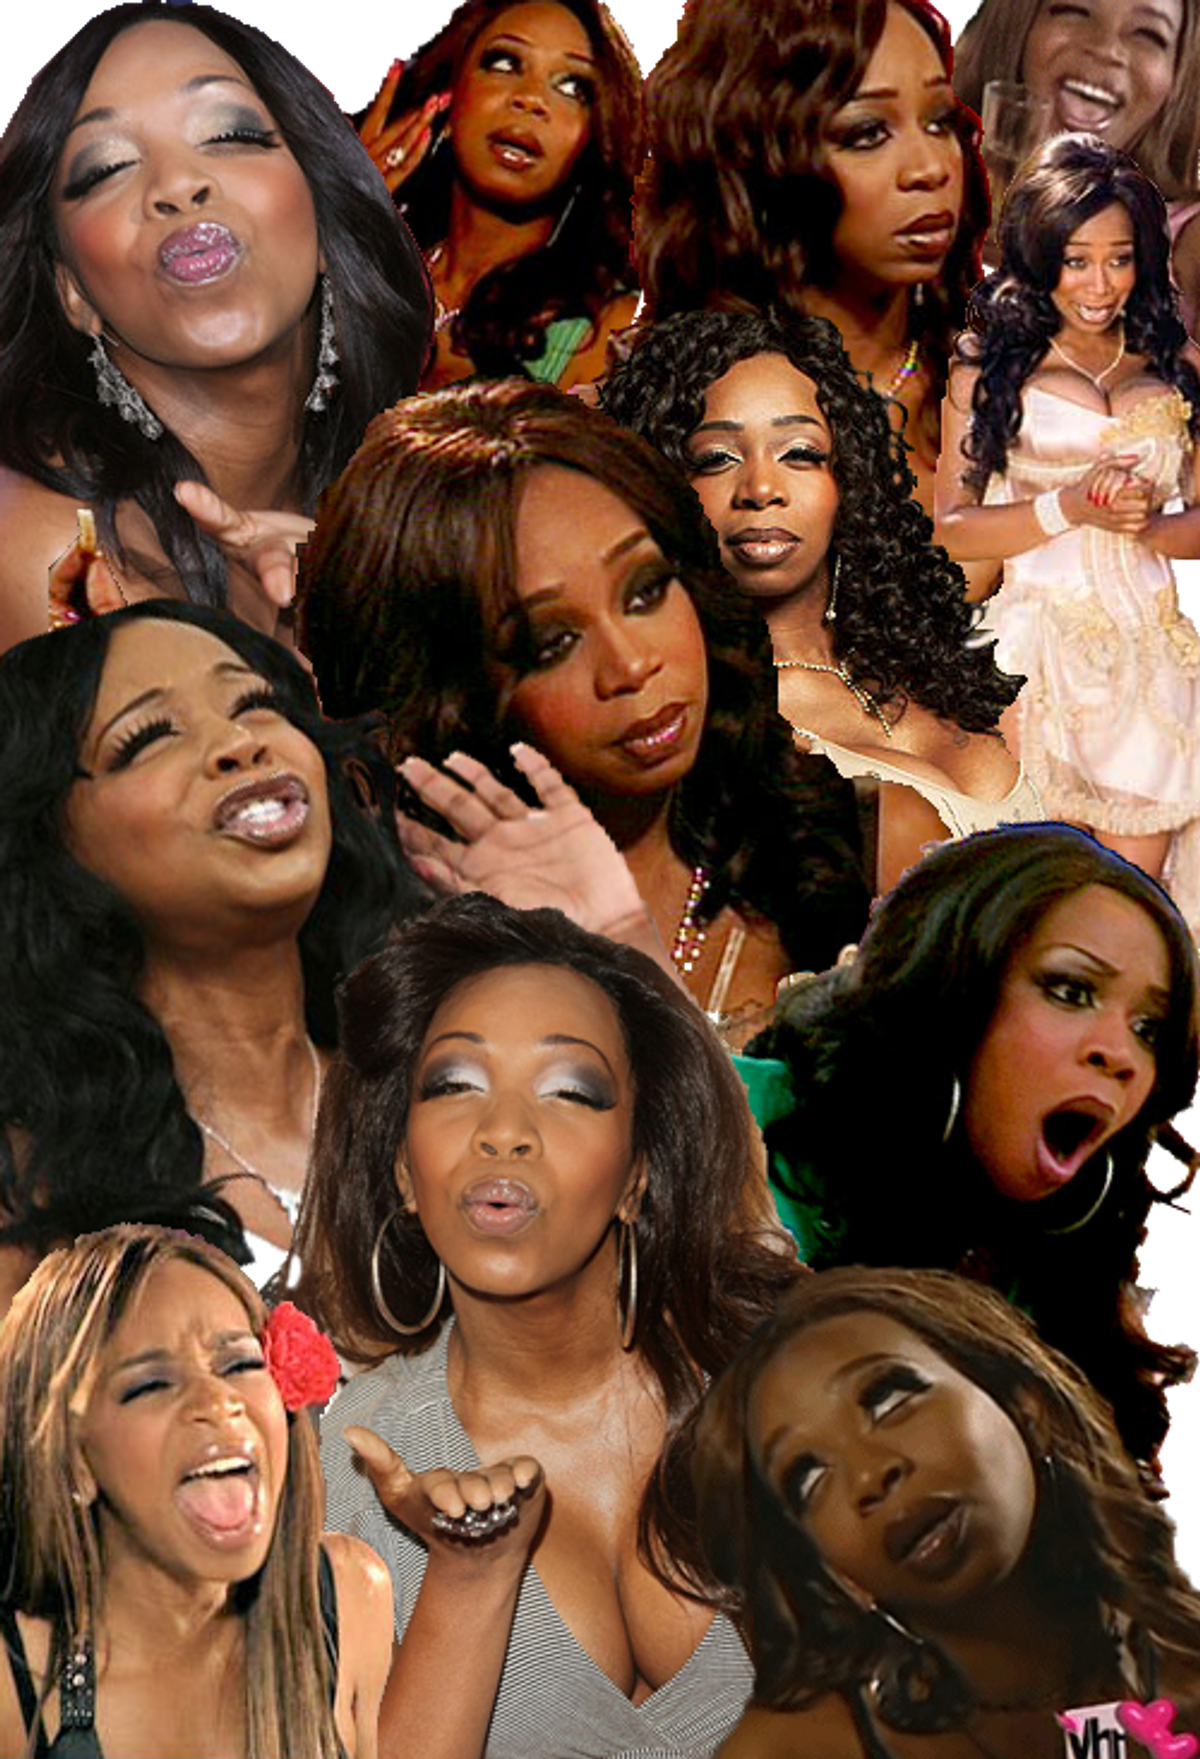 29 Tiffany 'New York' Pollard GIFs To Get You Through Your Day